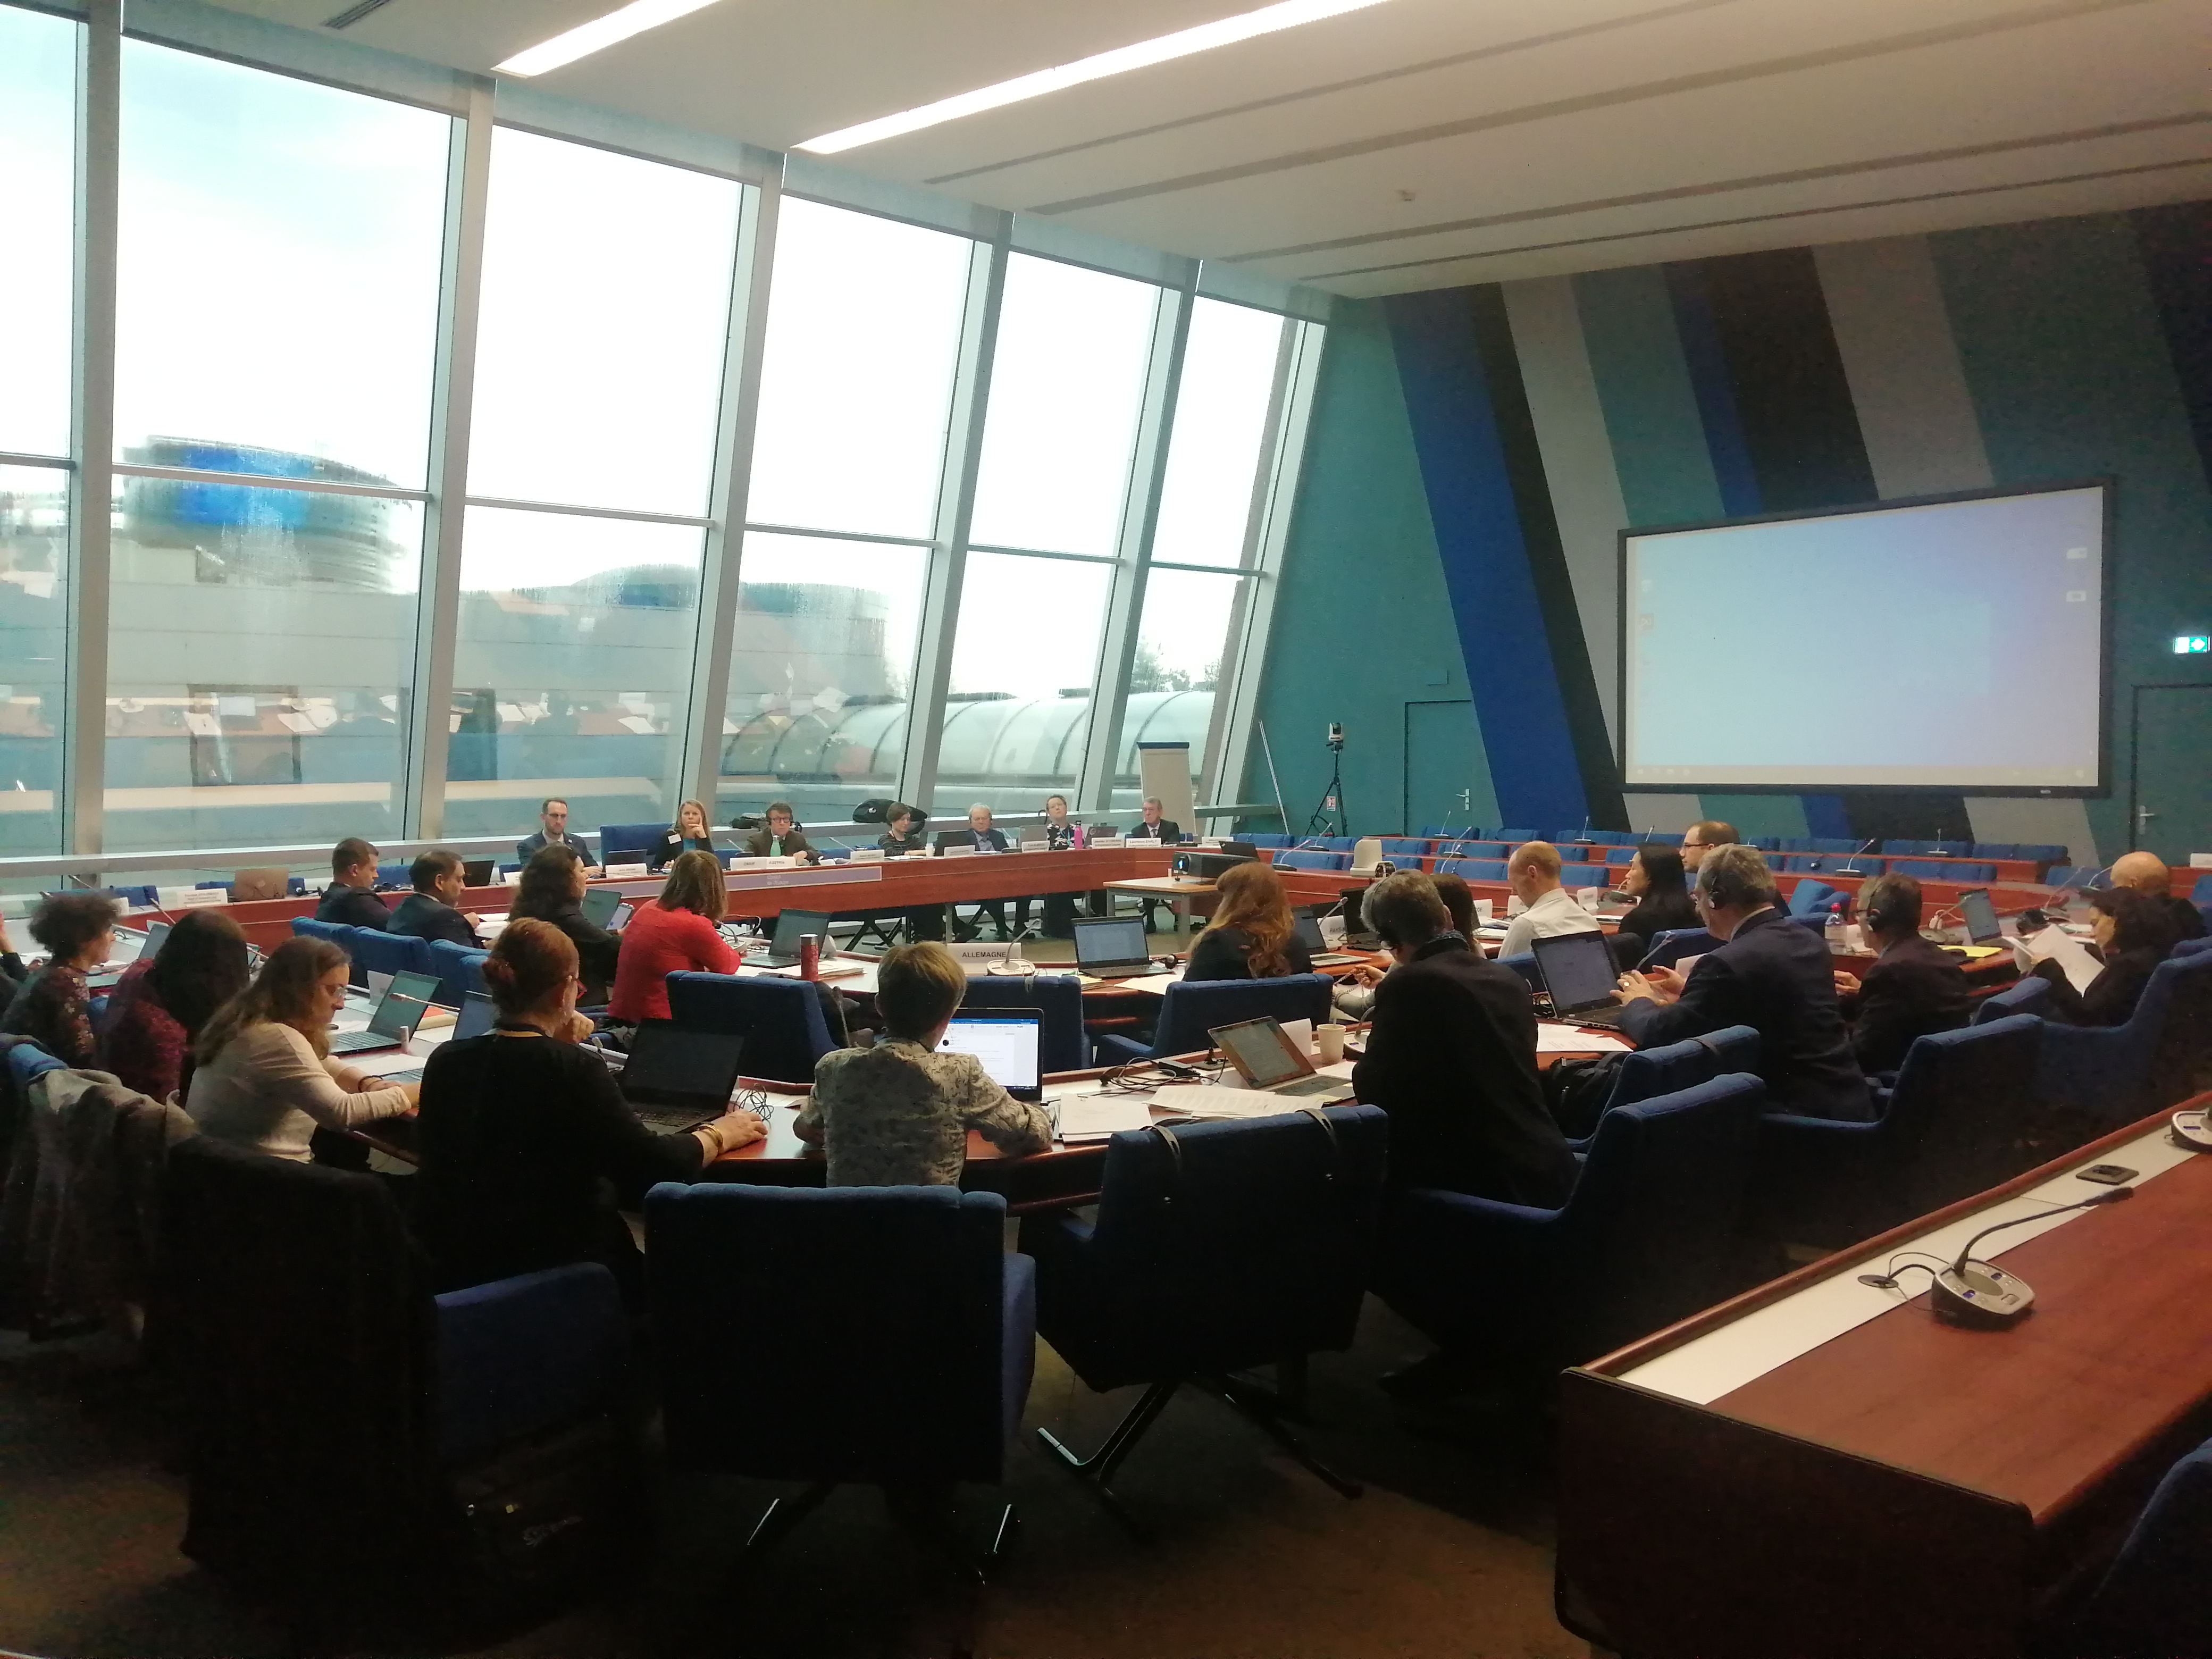 Third meeting of PC/ADI-CH takes place in Strasbourg